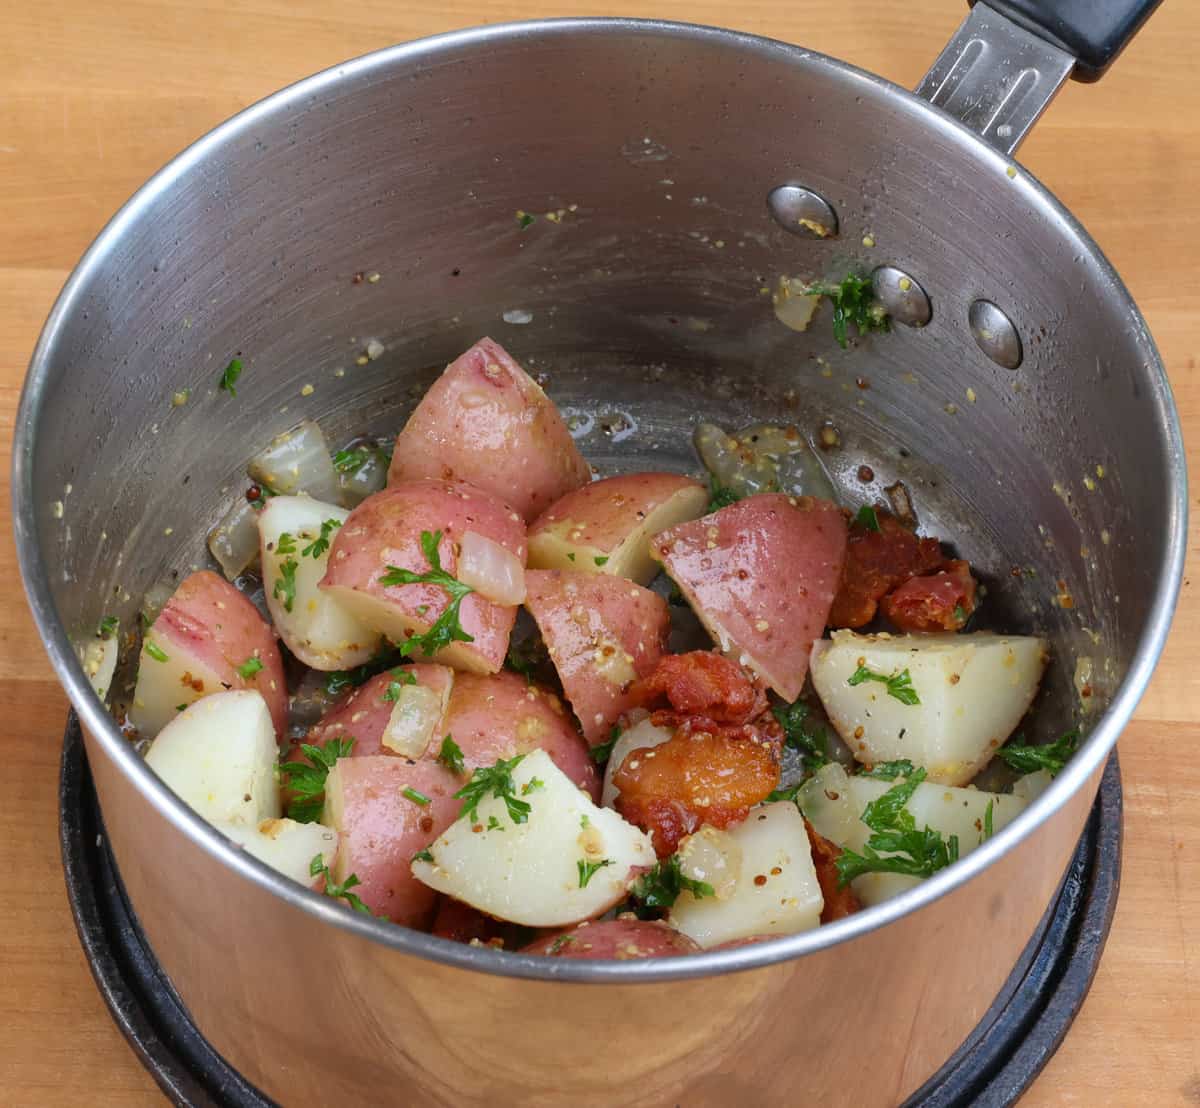 warm german potato salad in a pot on the stove.